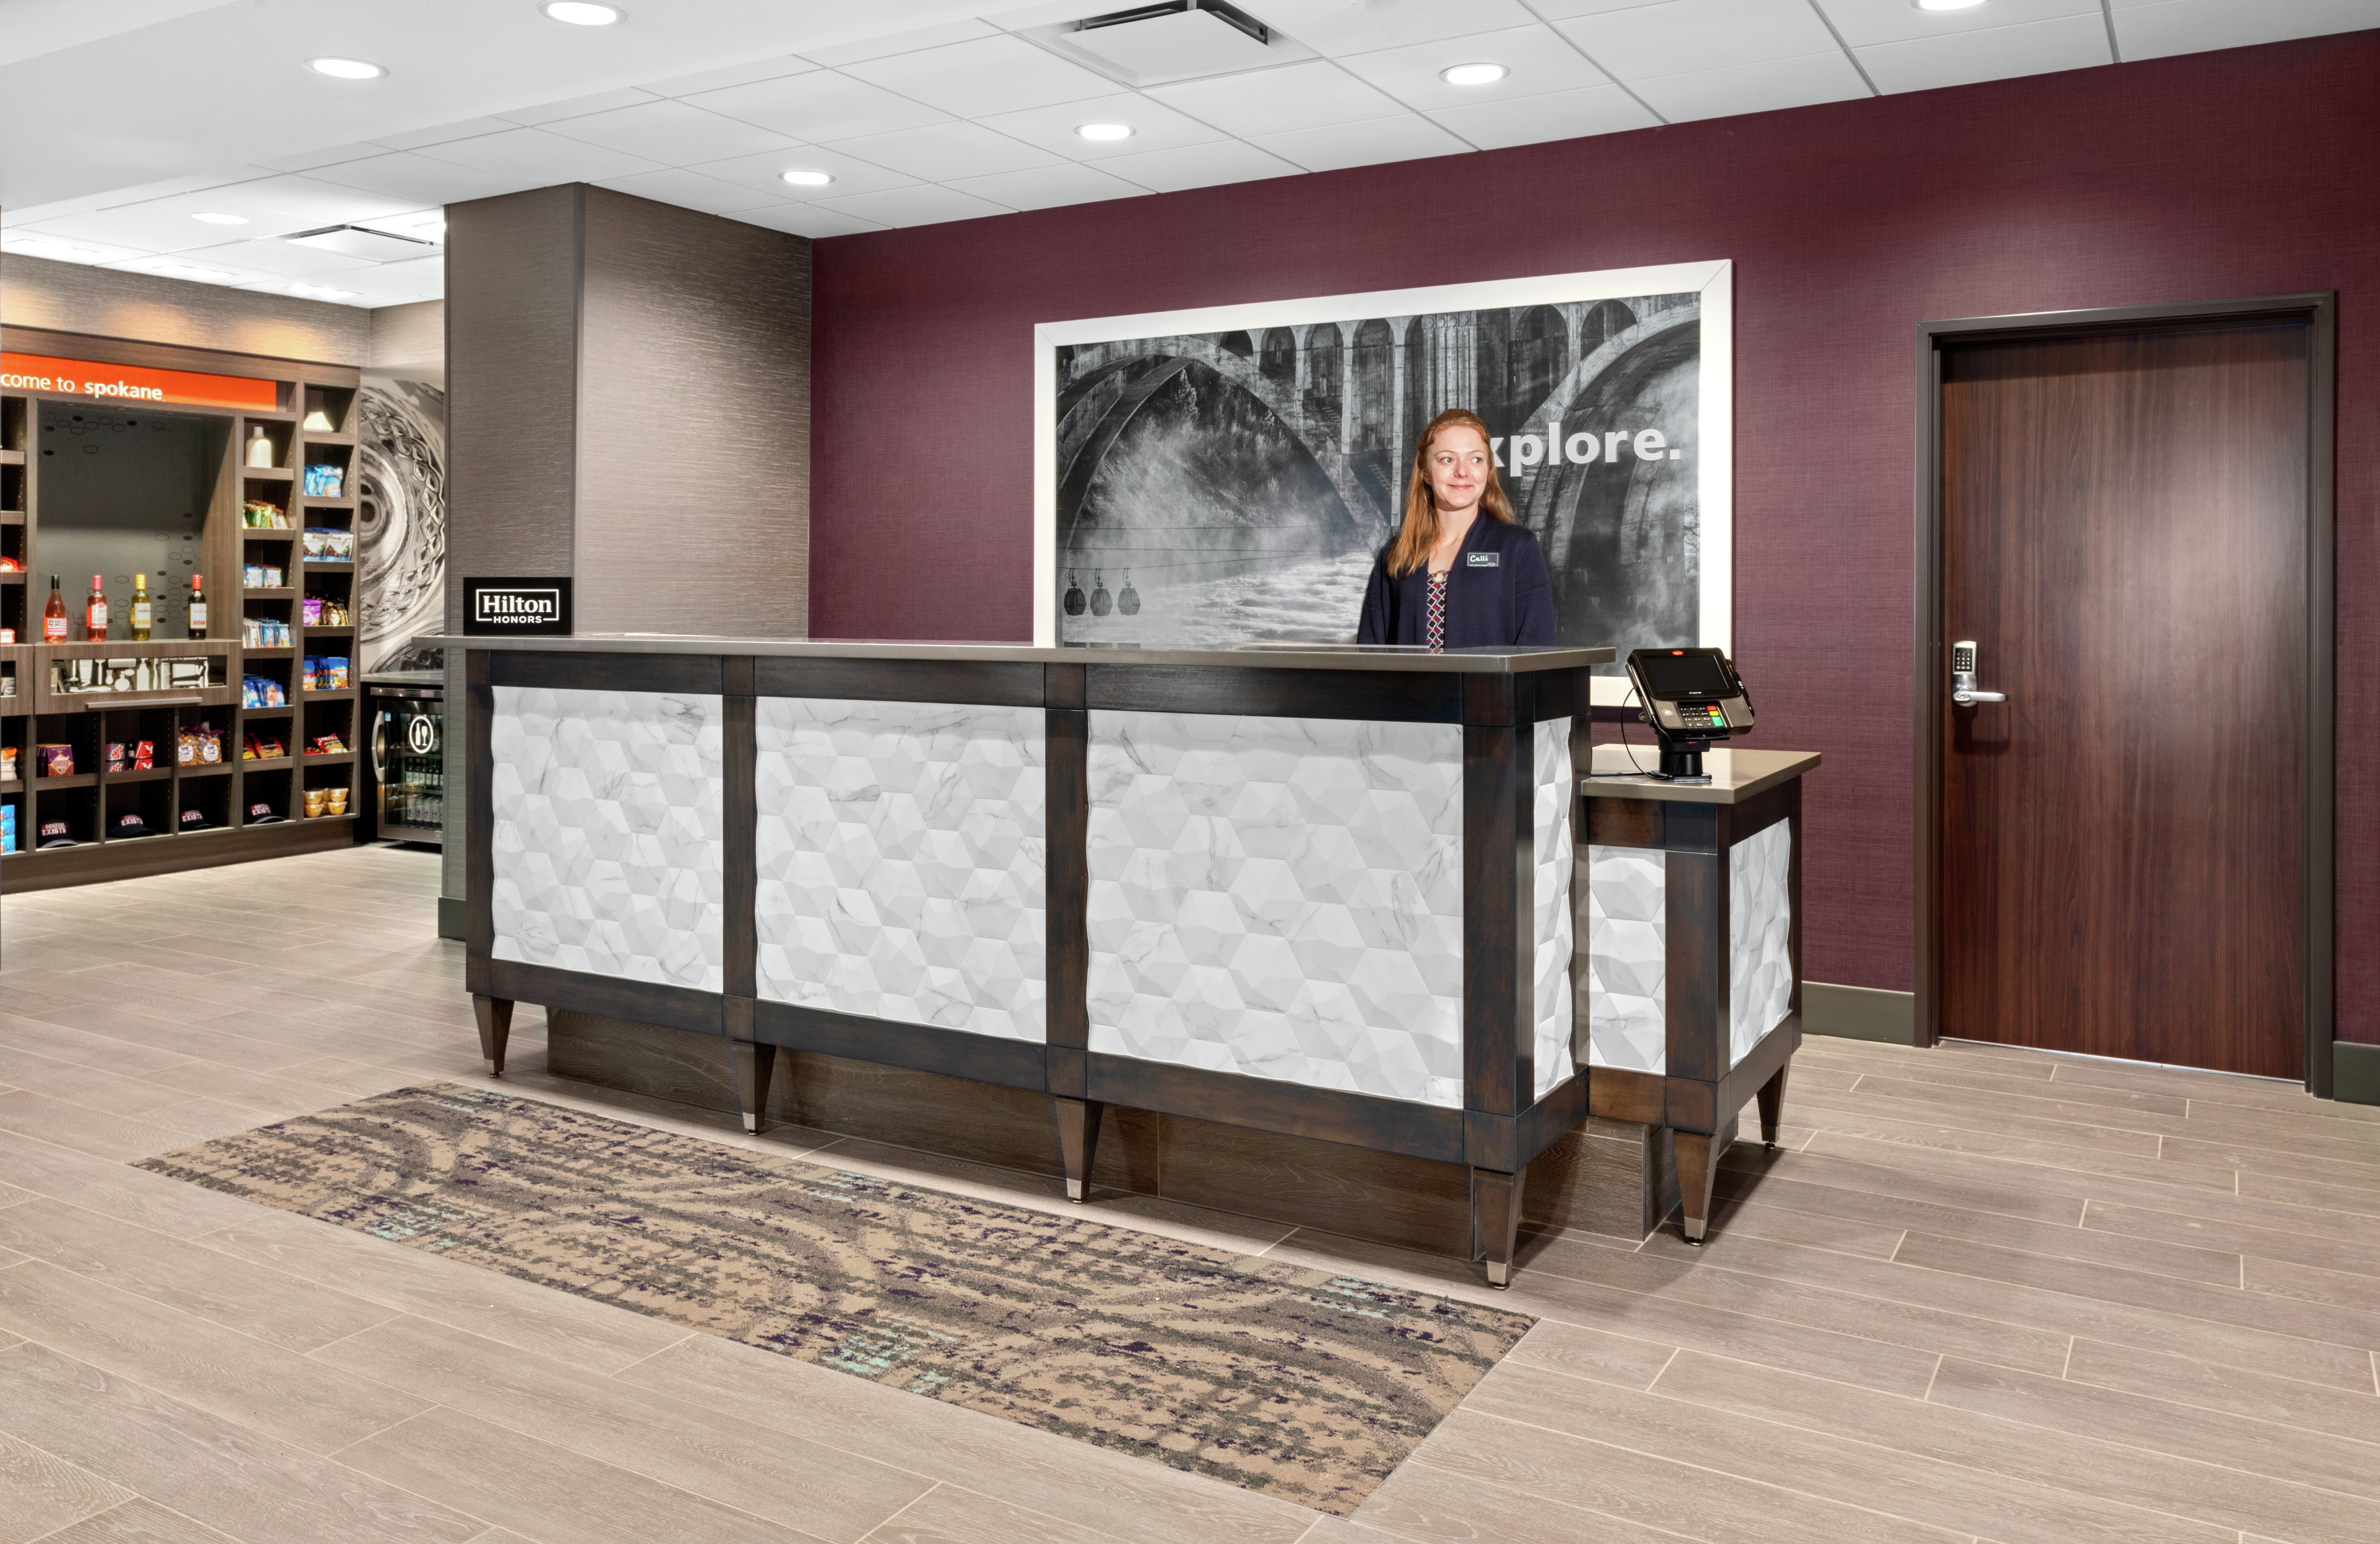 Front Desk with Staff